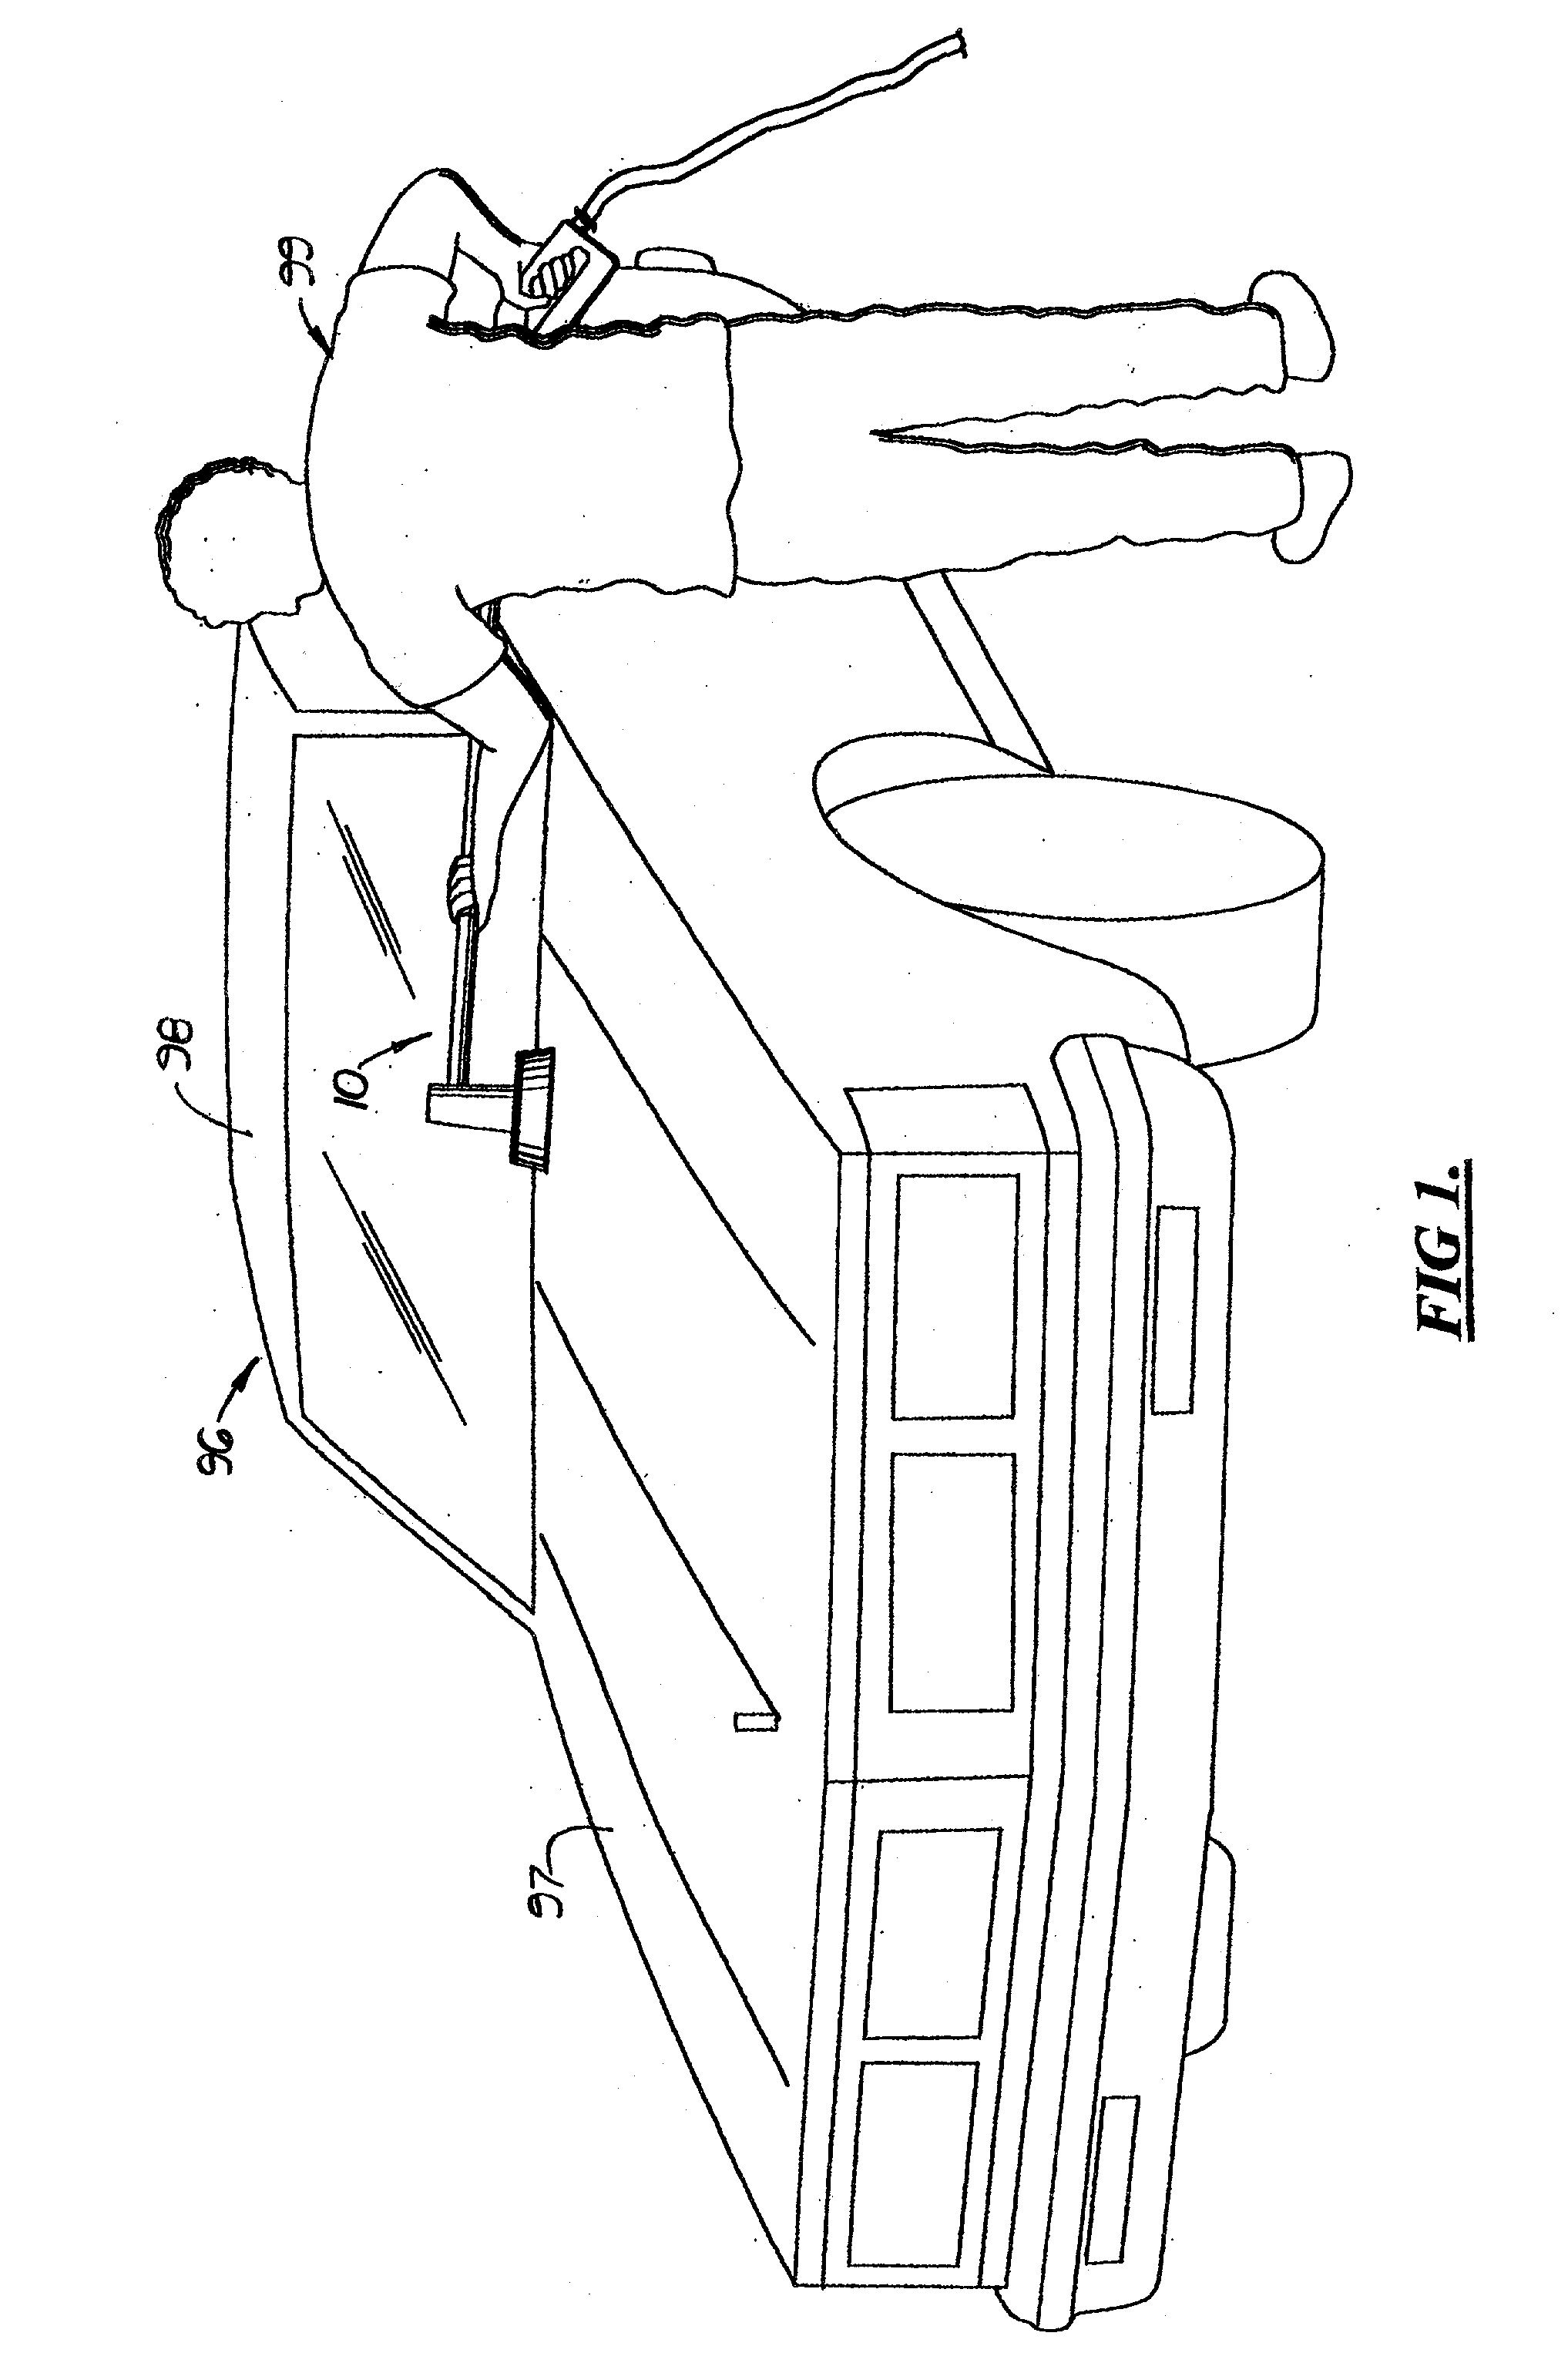 Hand held, electric cleaning device